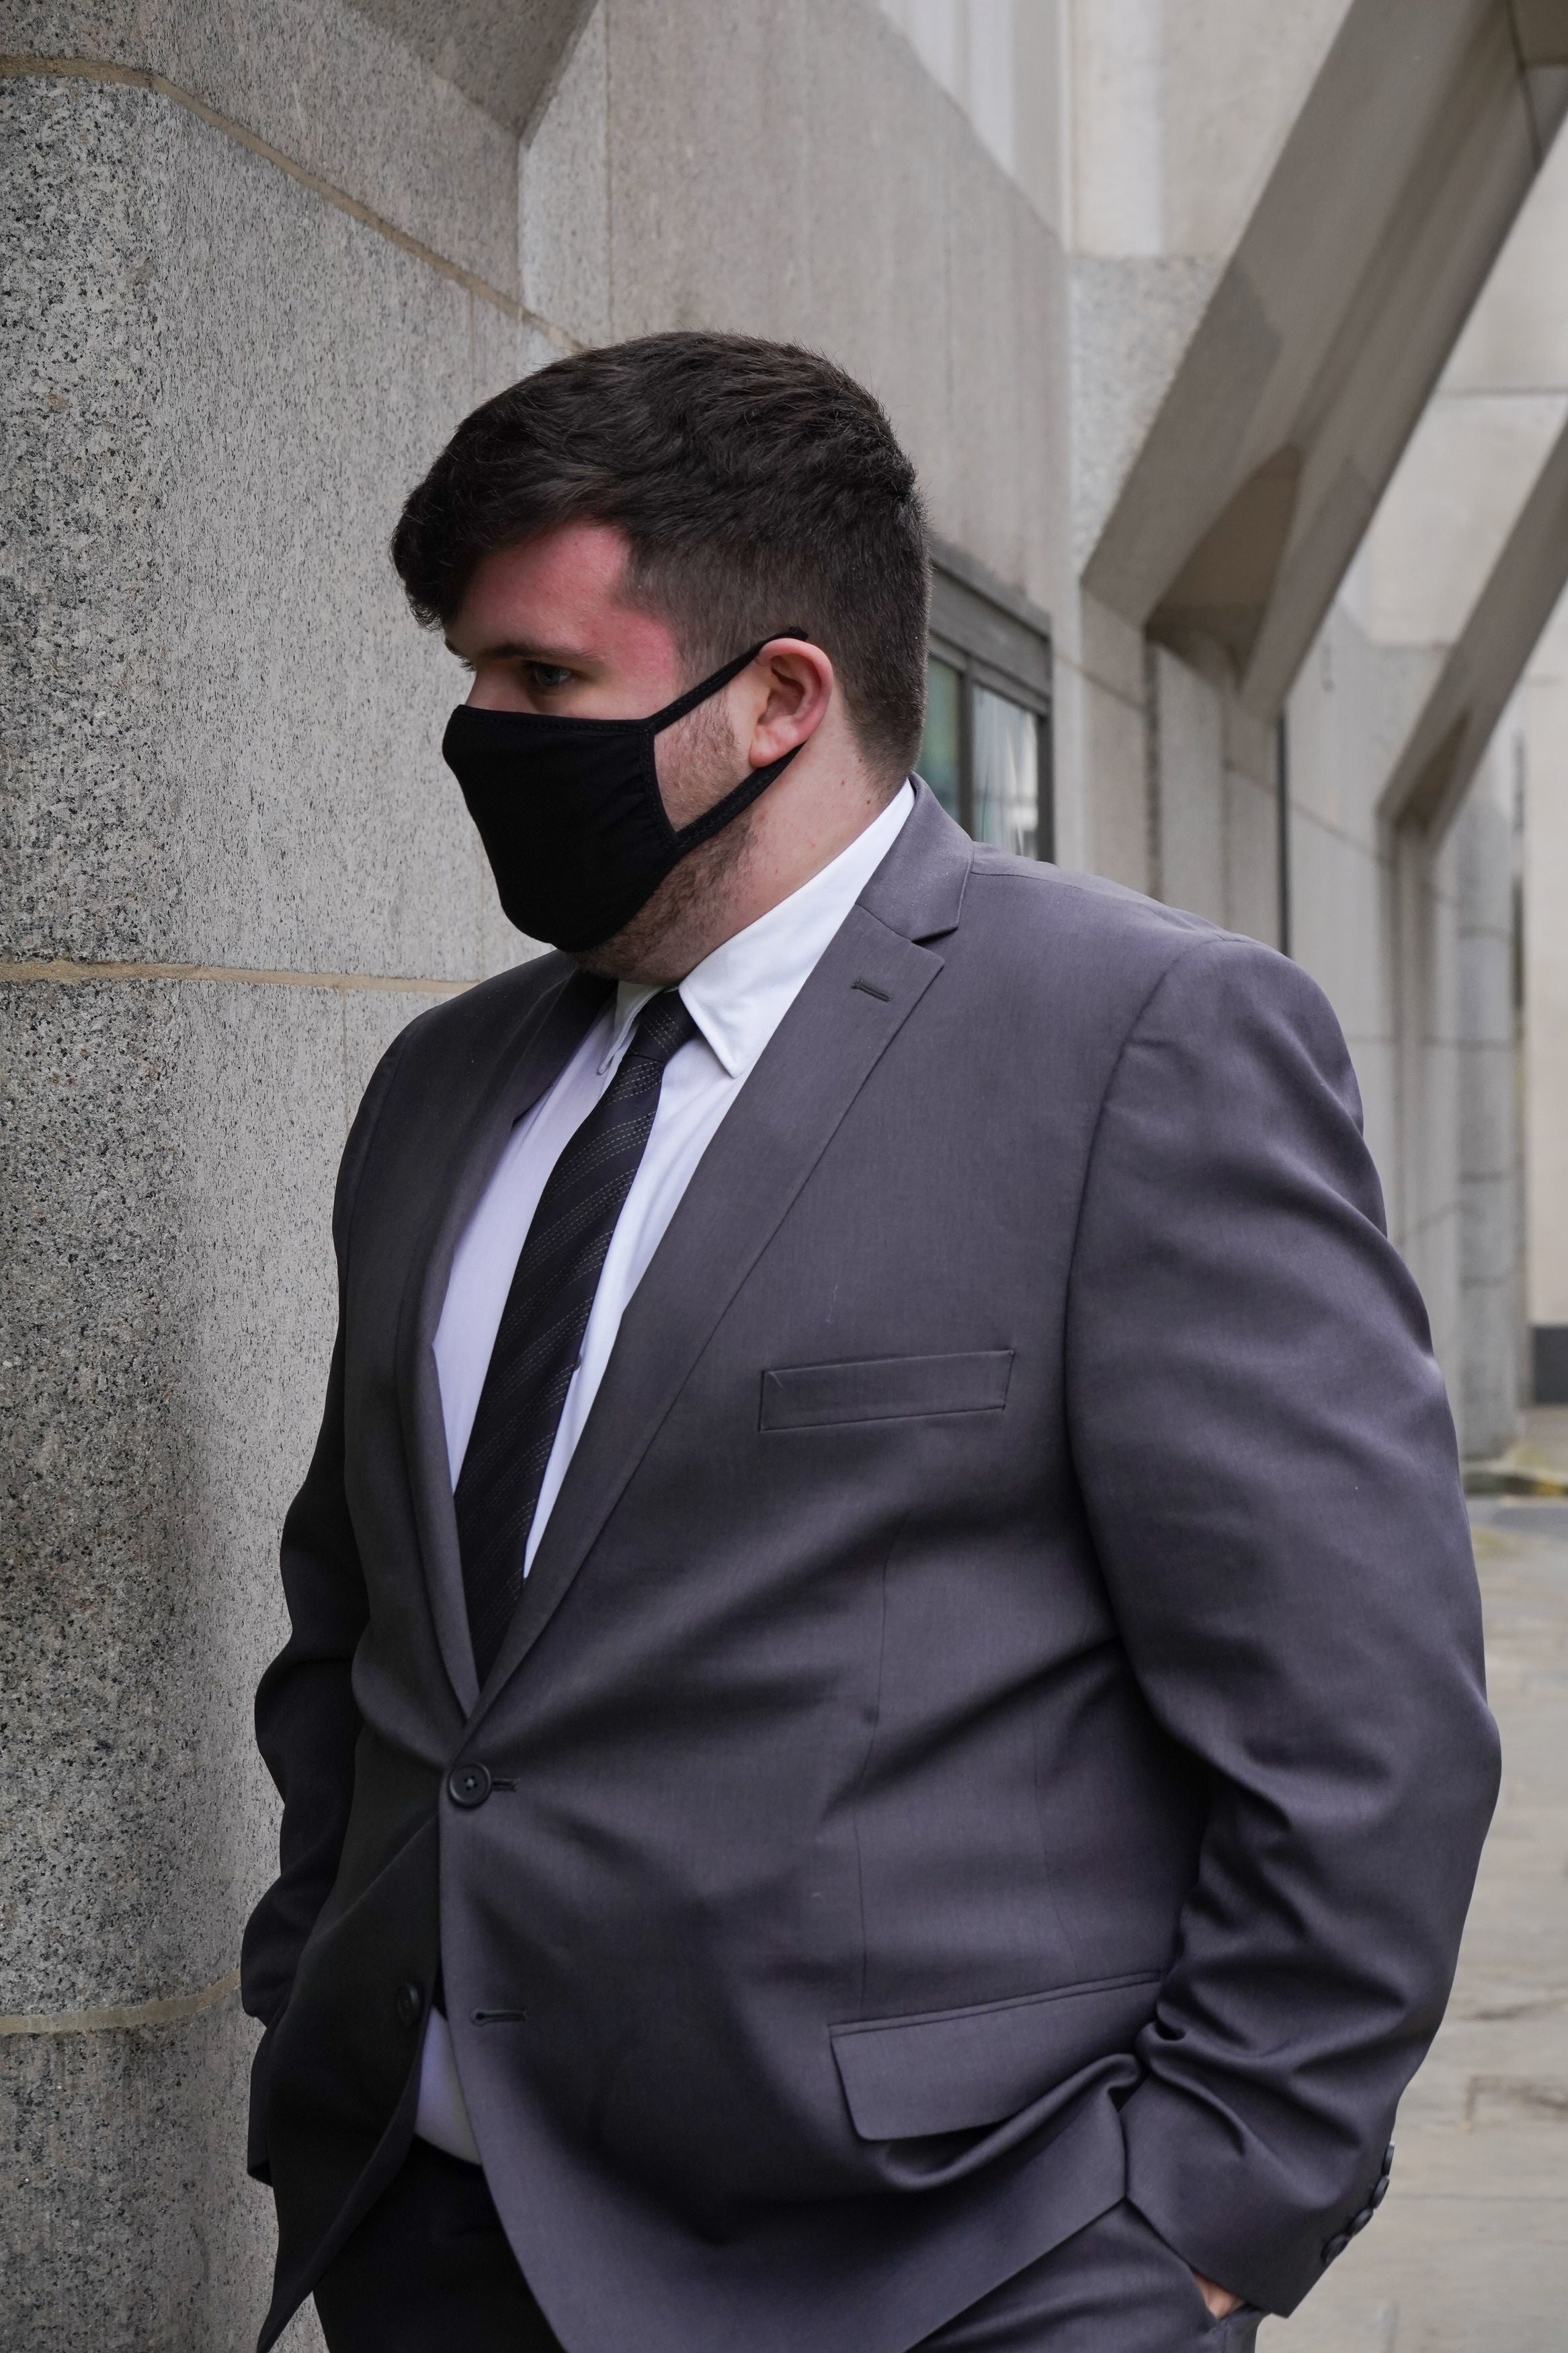 Jacob Crimi-Appleby previously arriving at the Old Bailey in central London, where he pleaded guilty to causing grievous bodily harm with intent to Marius Gustavson in February 2019 eiqrkireiderinv